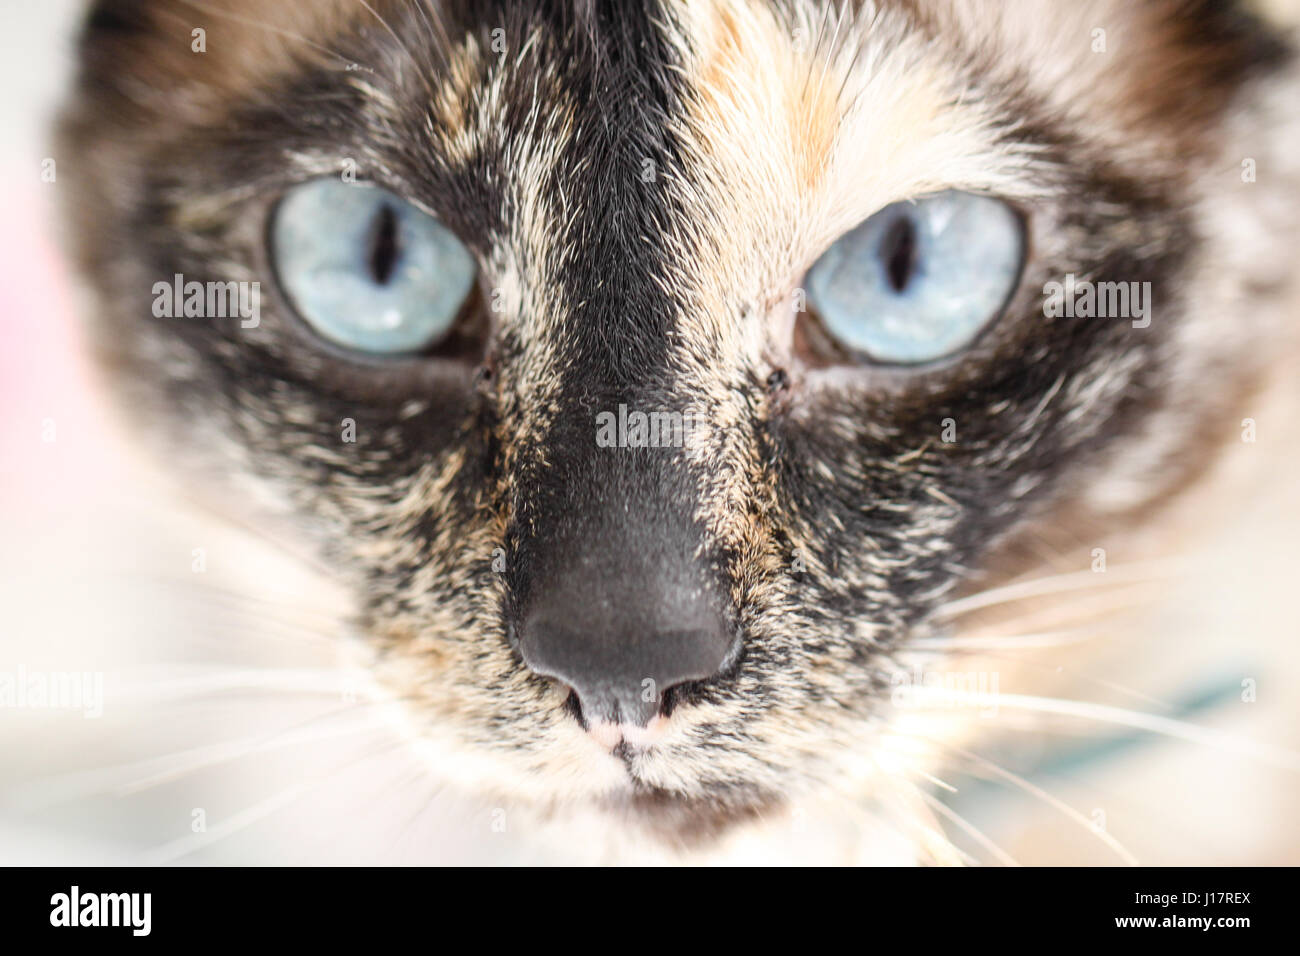 cat eyes.  captivating closeup of siamese cat with unusual markings draws you into the image with the feline's intense ice-blue stare into the camera Stock Photo